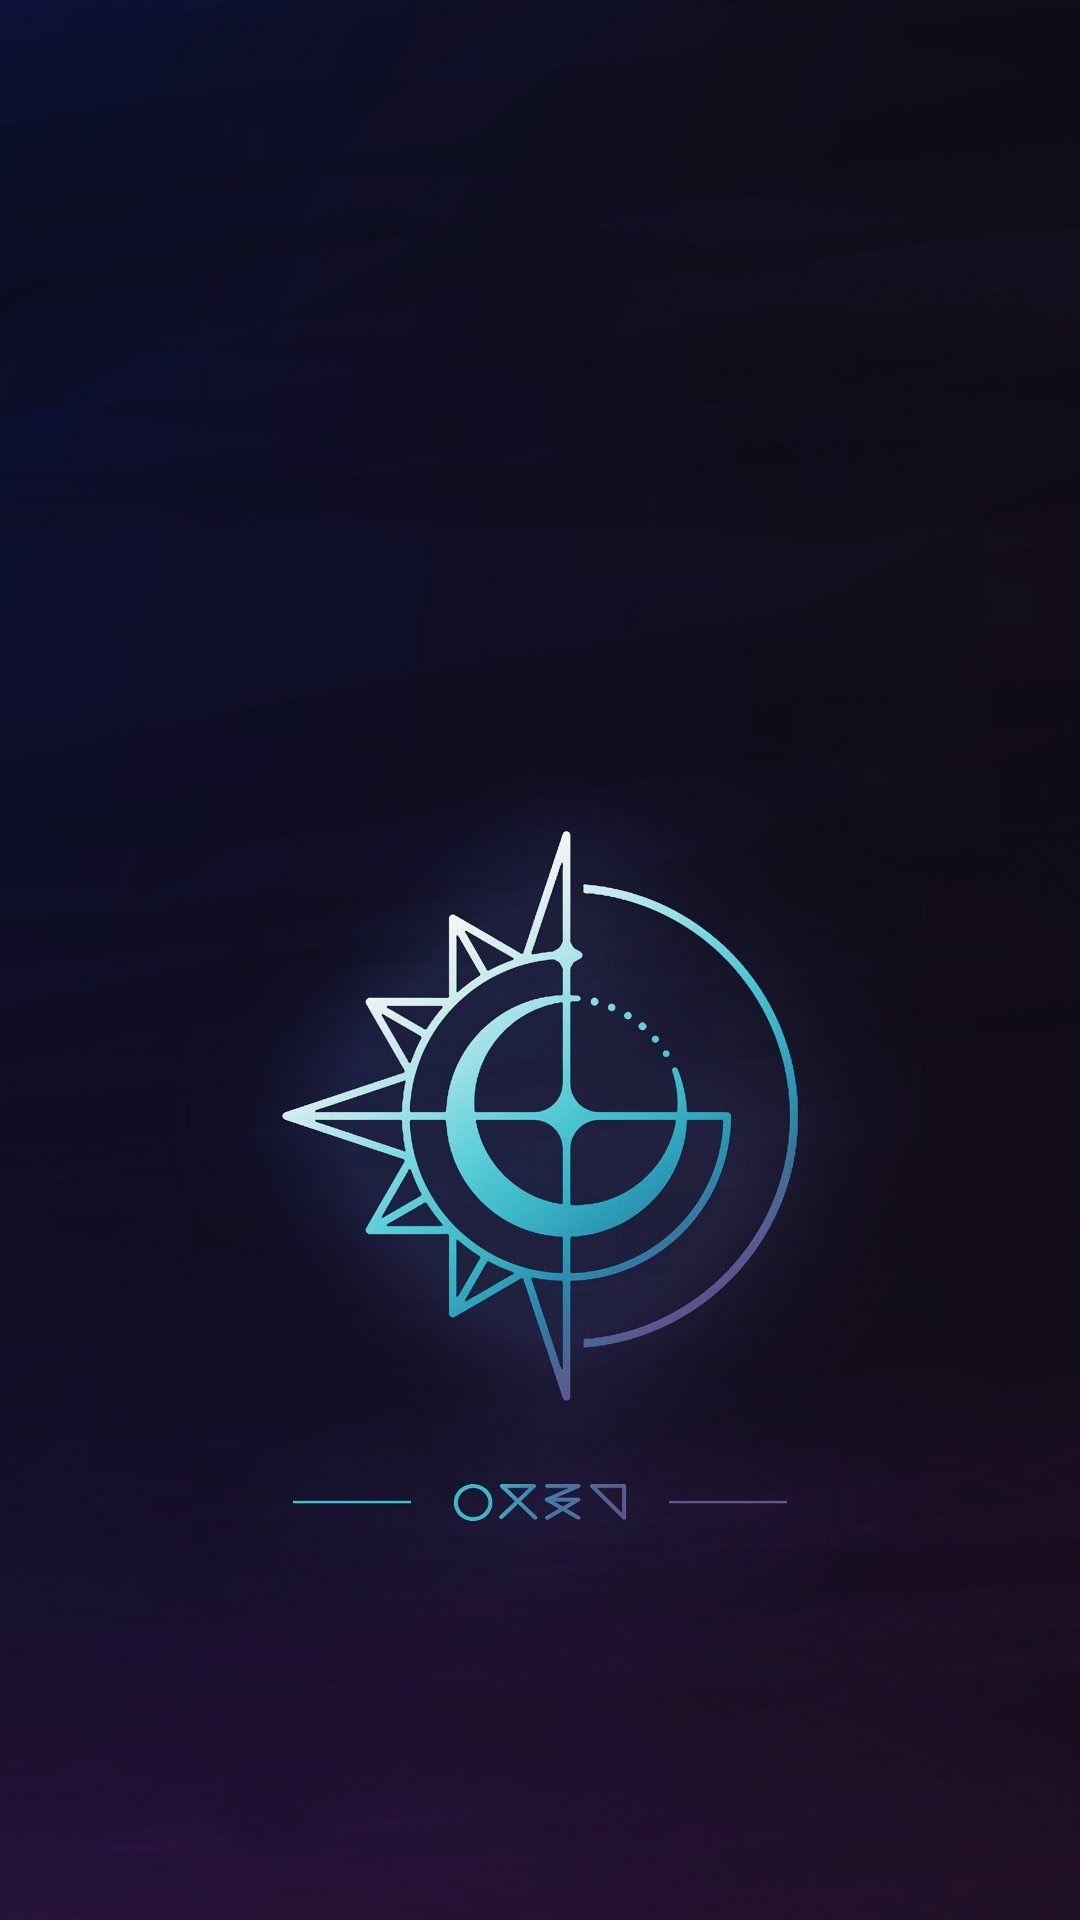 Gfriend Logo - 여자친구 #GFRIEND #The_6th_Mini_Album #Time_for_the_moon_night